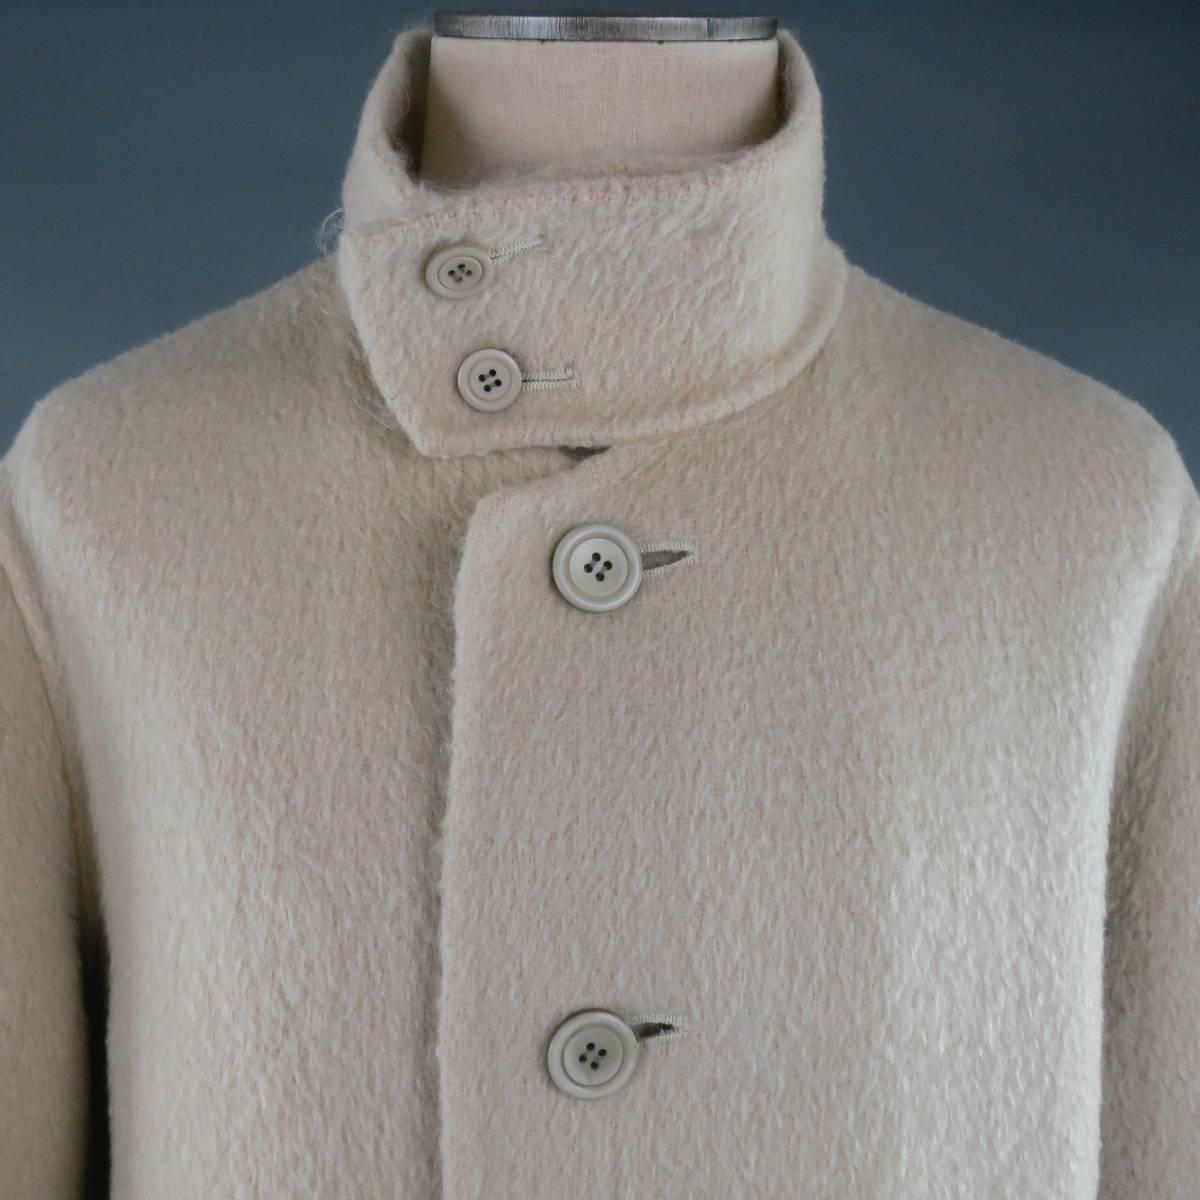 ISSEY MIYAKE Coat consists of wool blend material in a cream color tone. Designed in a oversize style, button-up front and bottom patch pockets. Detailed with a high collar button closure. Fuzzy texture with cropped sleeves. Made in Japan.
